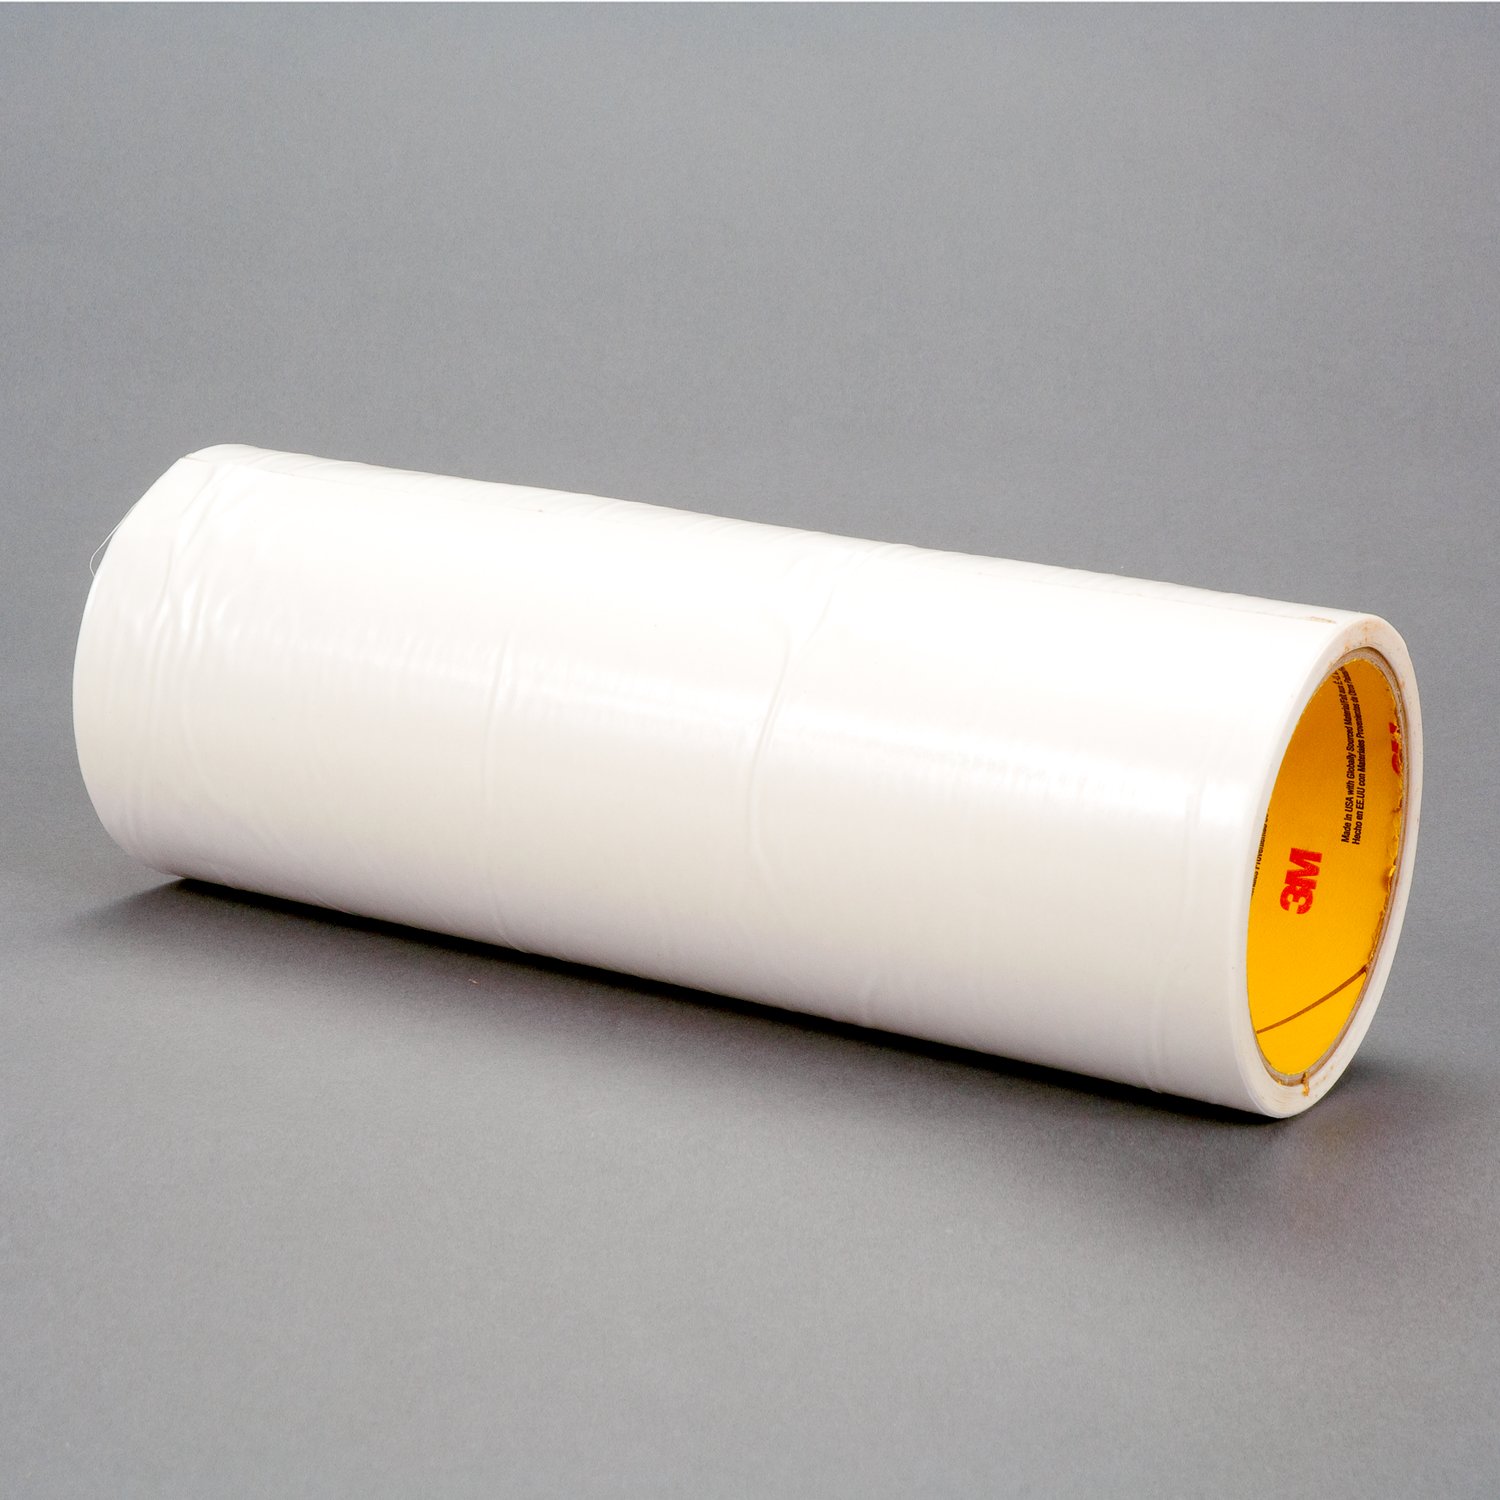 7010373969 - 3M Double Coated Tape 9817M, Clear, 60 in x 250 yd, 3.3 mil, 1 roll per
case, 9 rolls per pallet